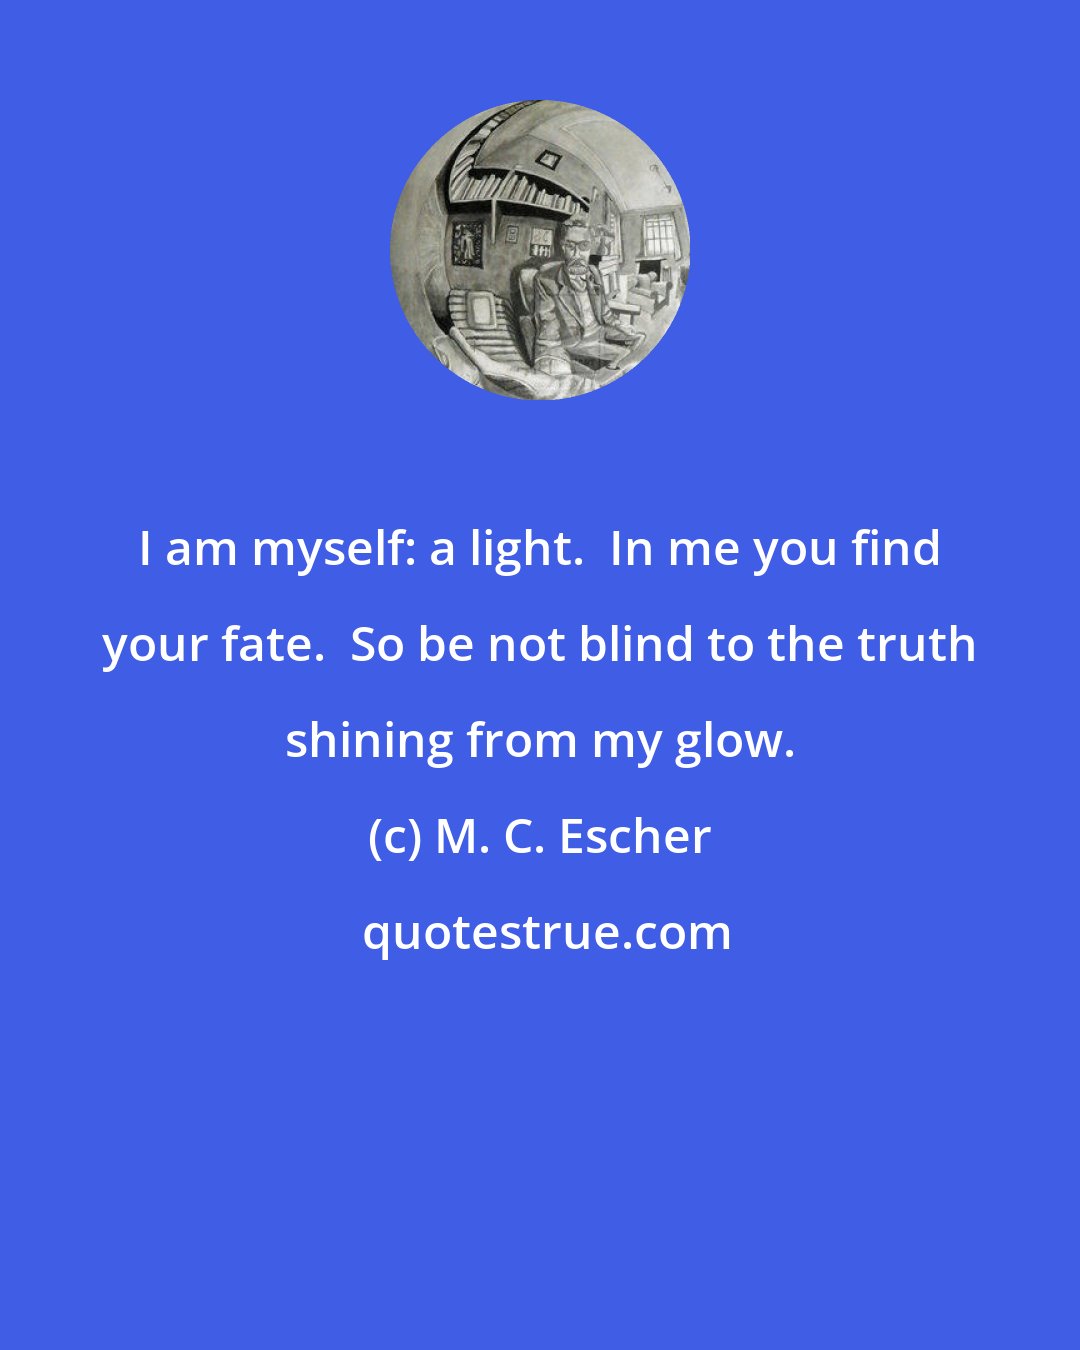 M. C. Escher: I am myself: a light.  In me you find your fate.  So be not blind to the truth shining from my glow.